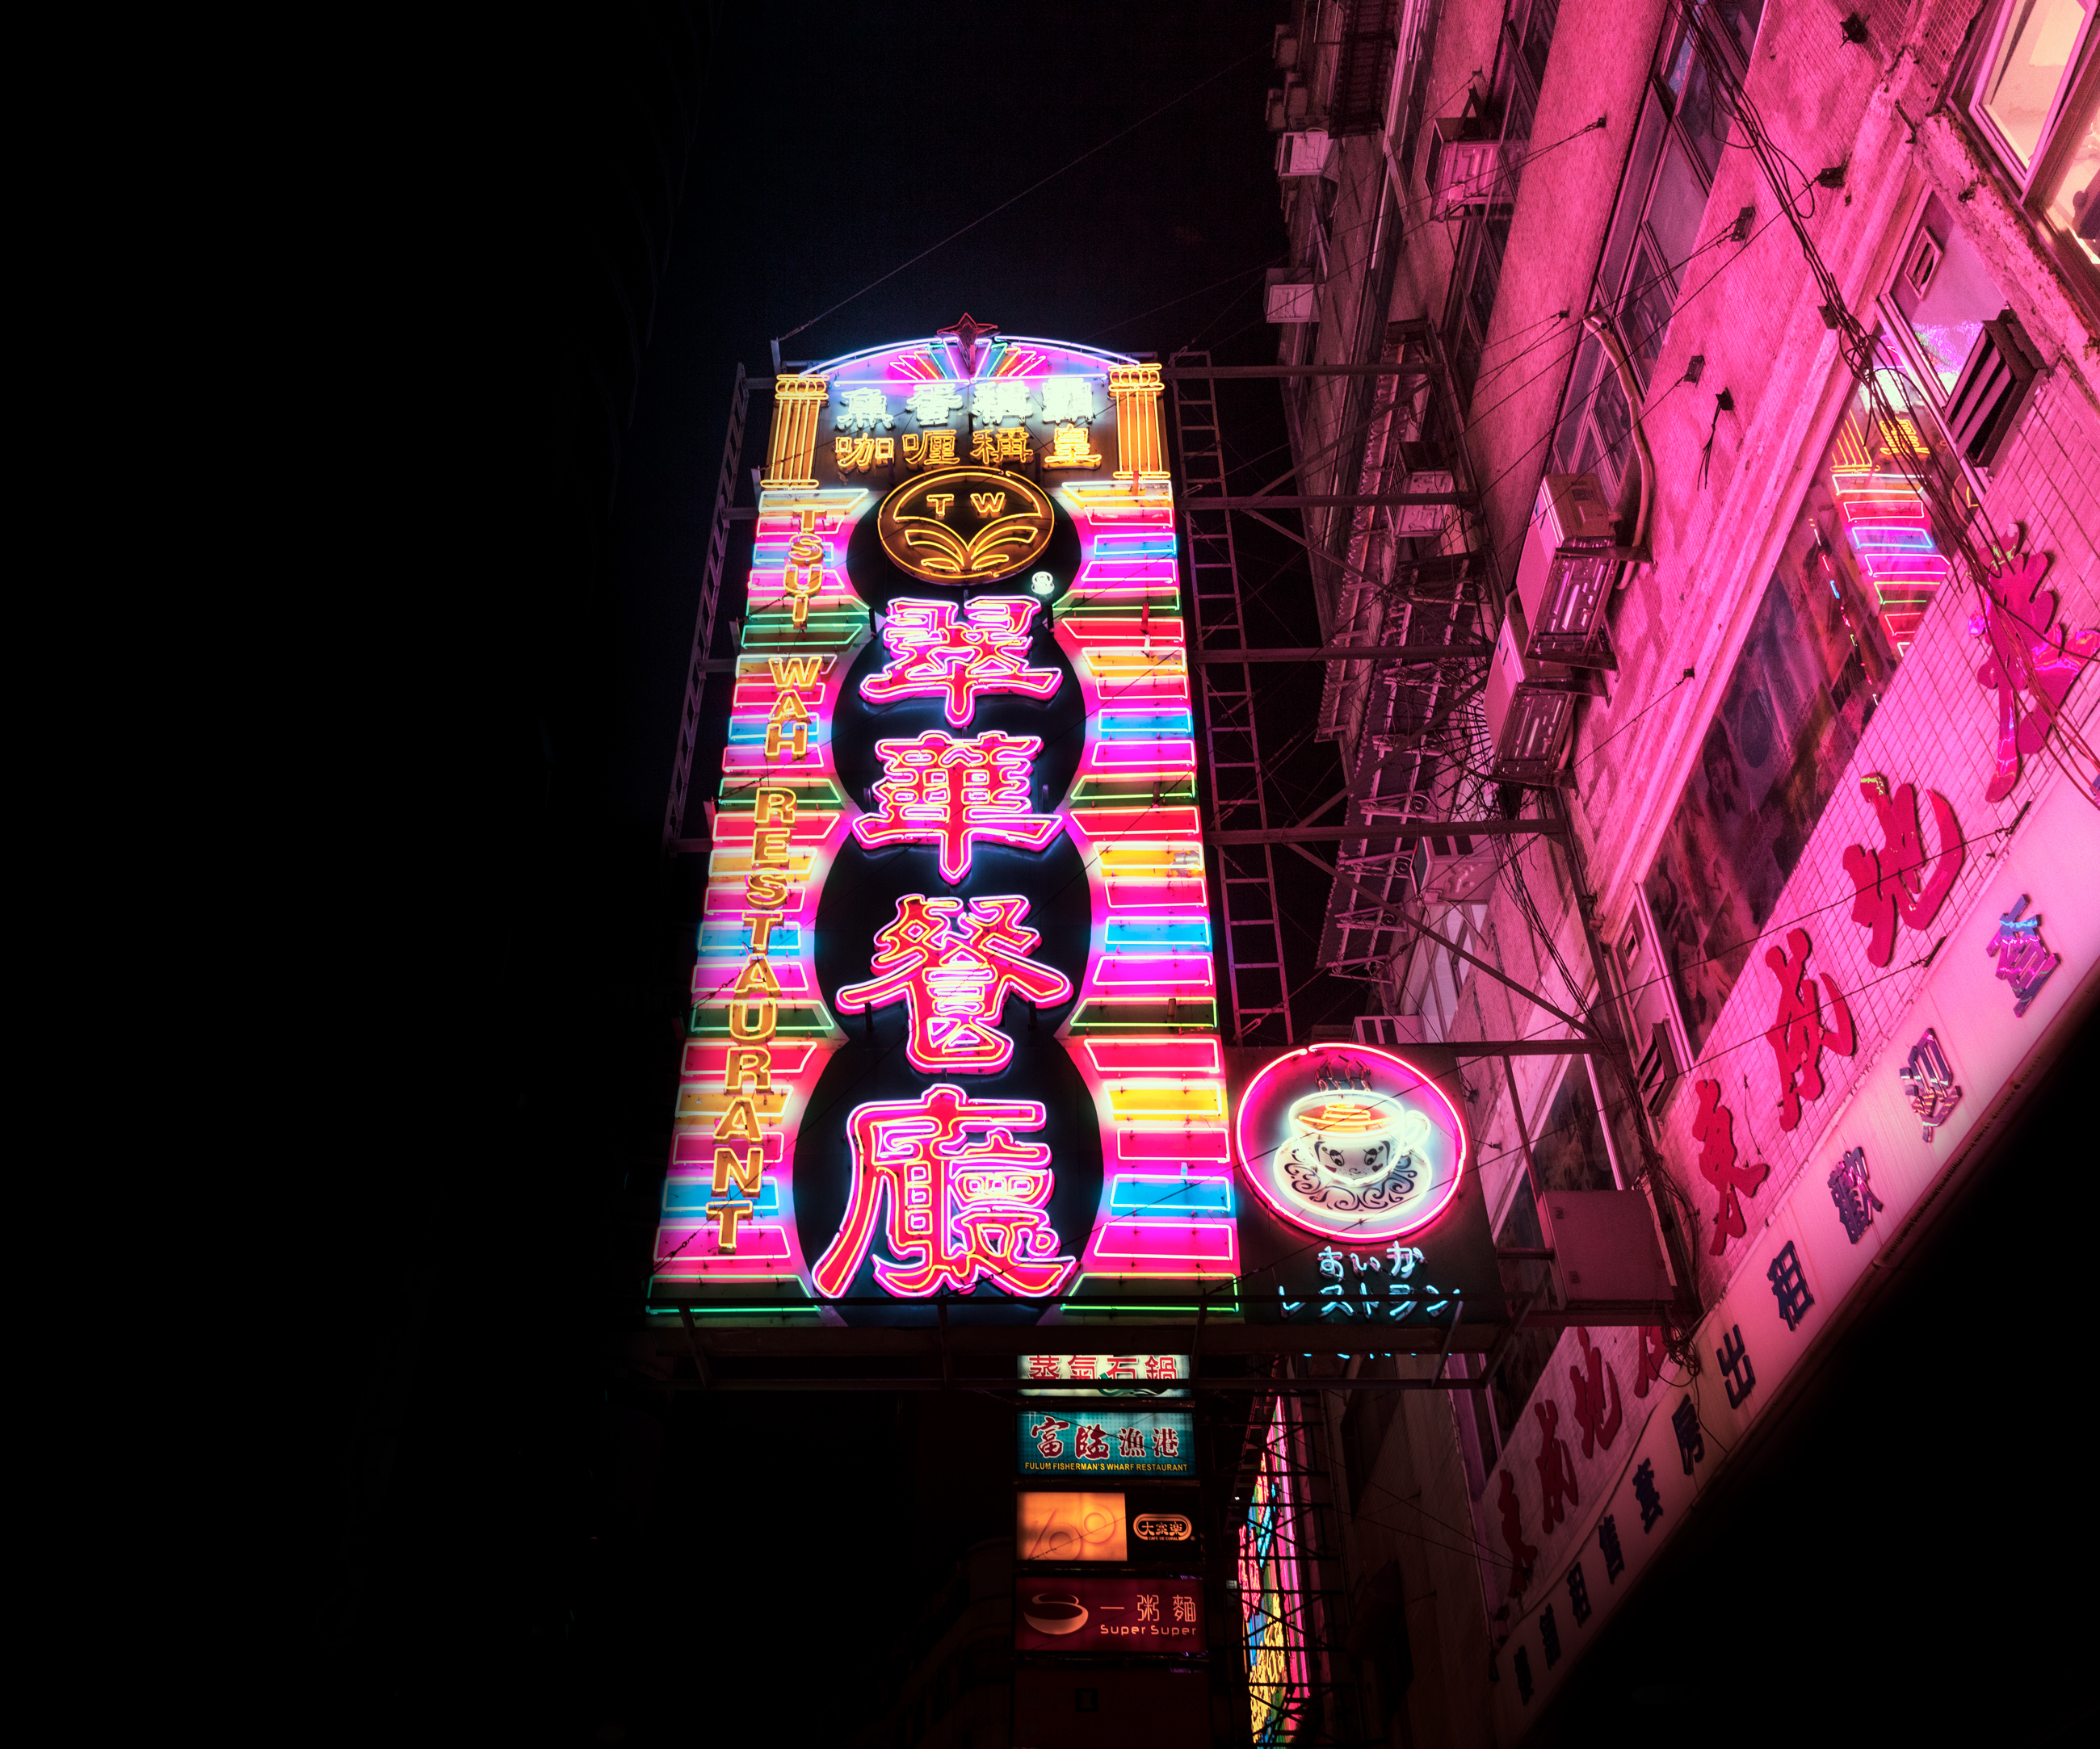 Digital Photography of Hong Kong by Ludwig Favre